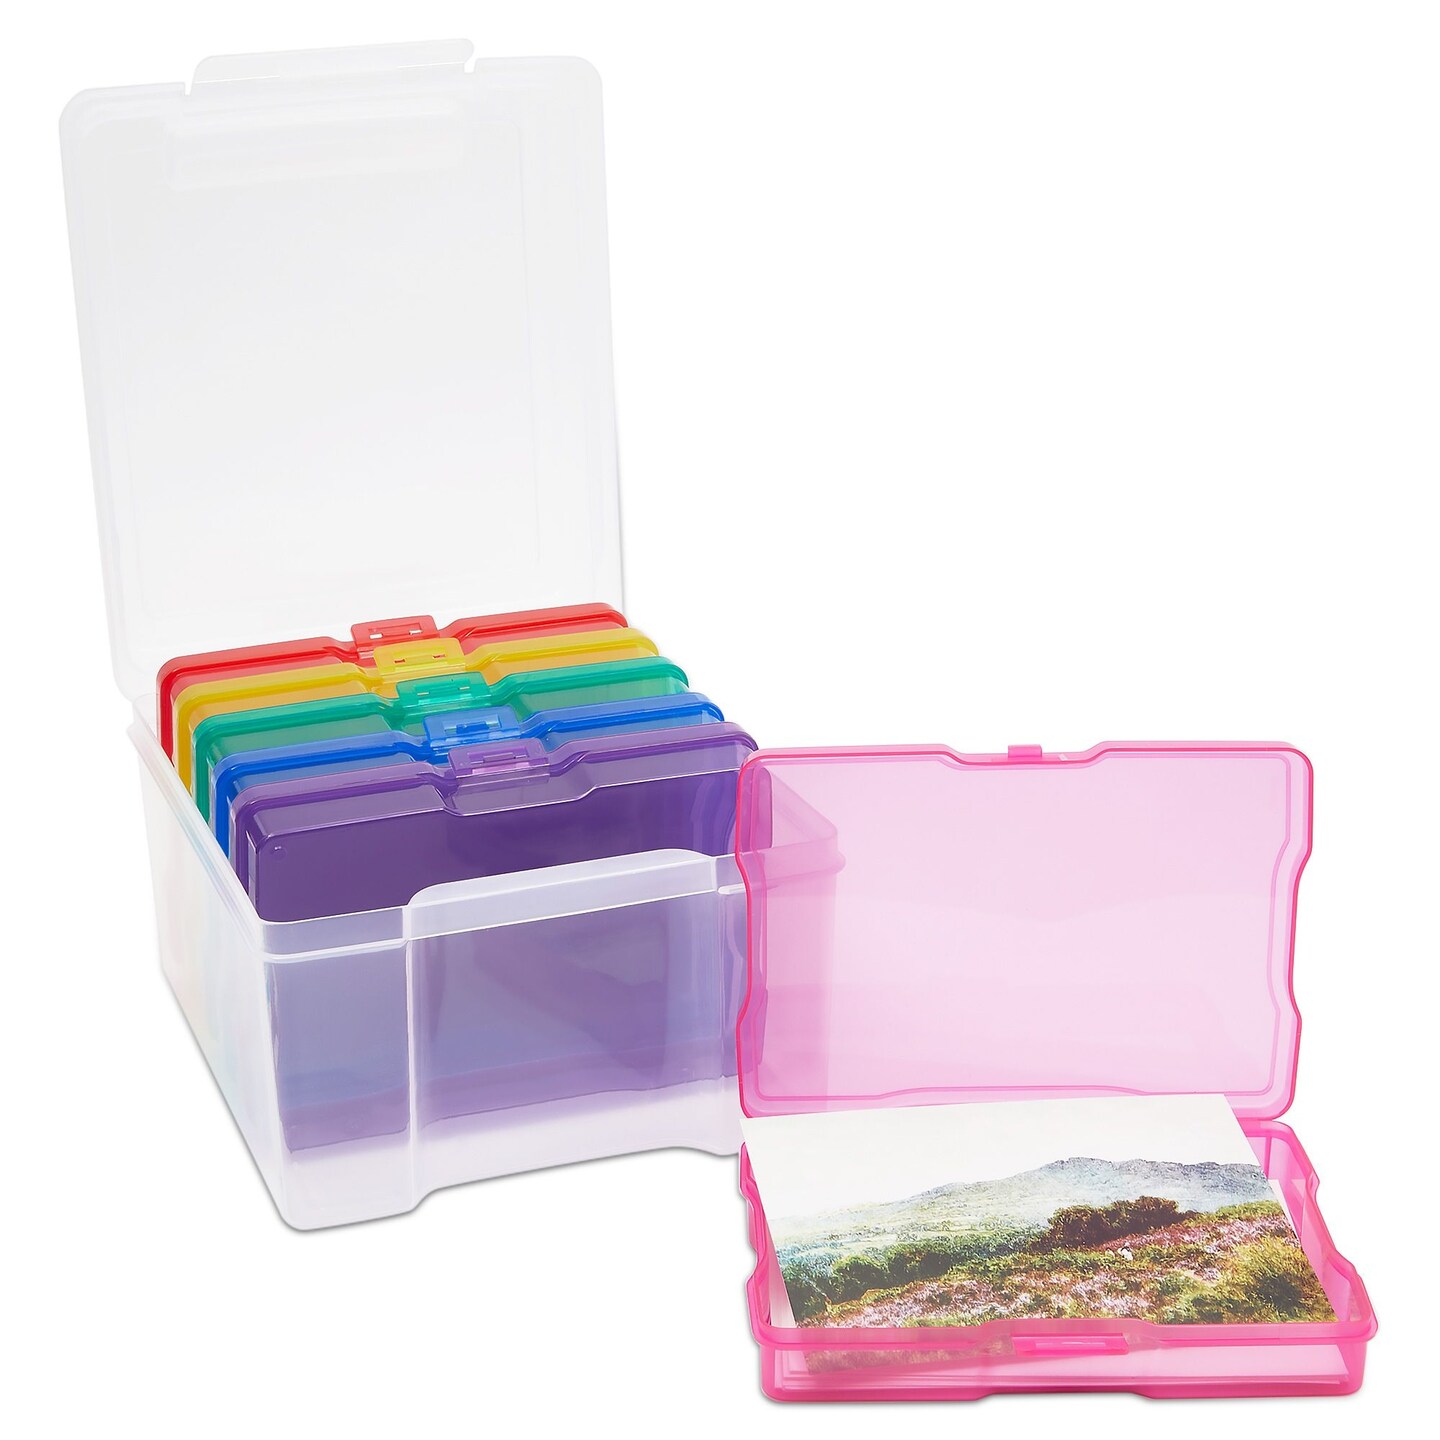 4x6 Clear Craft Storage Boxes